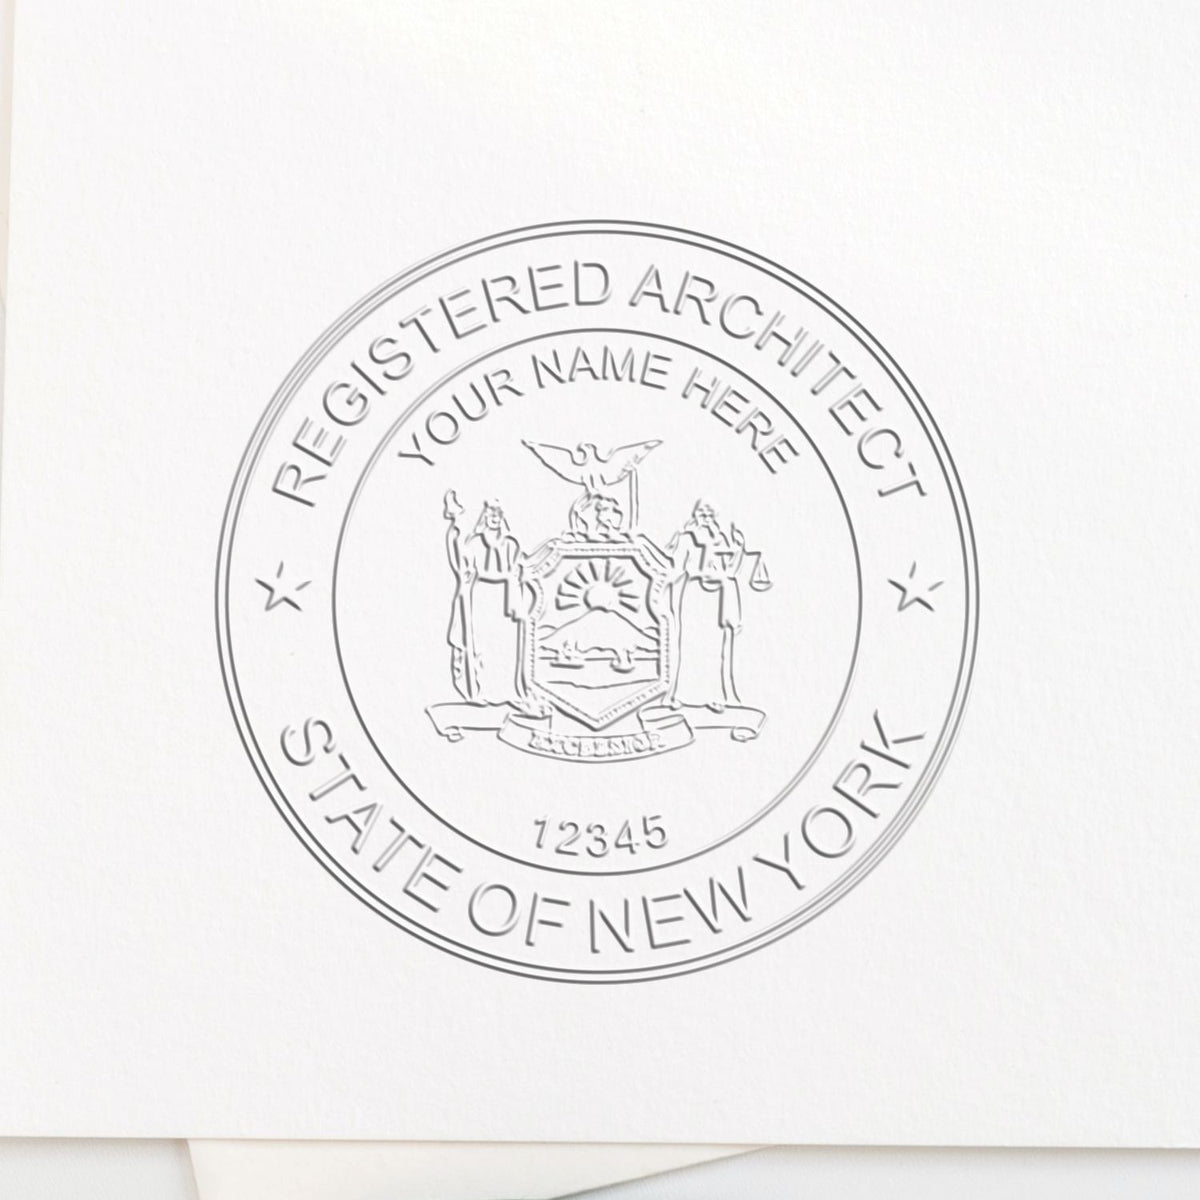 Another Example of a stamped impression of the Heavy Duty Cast Iron New York Architect Embosser on a piece of office paper.